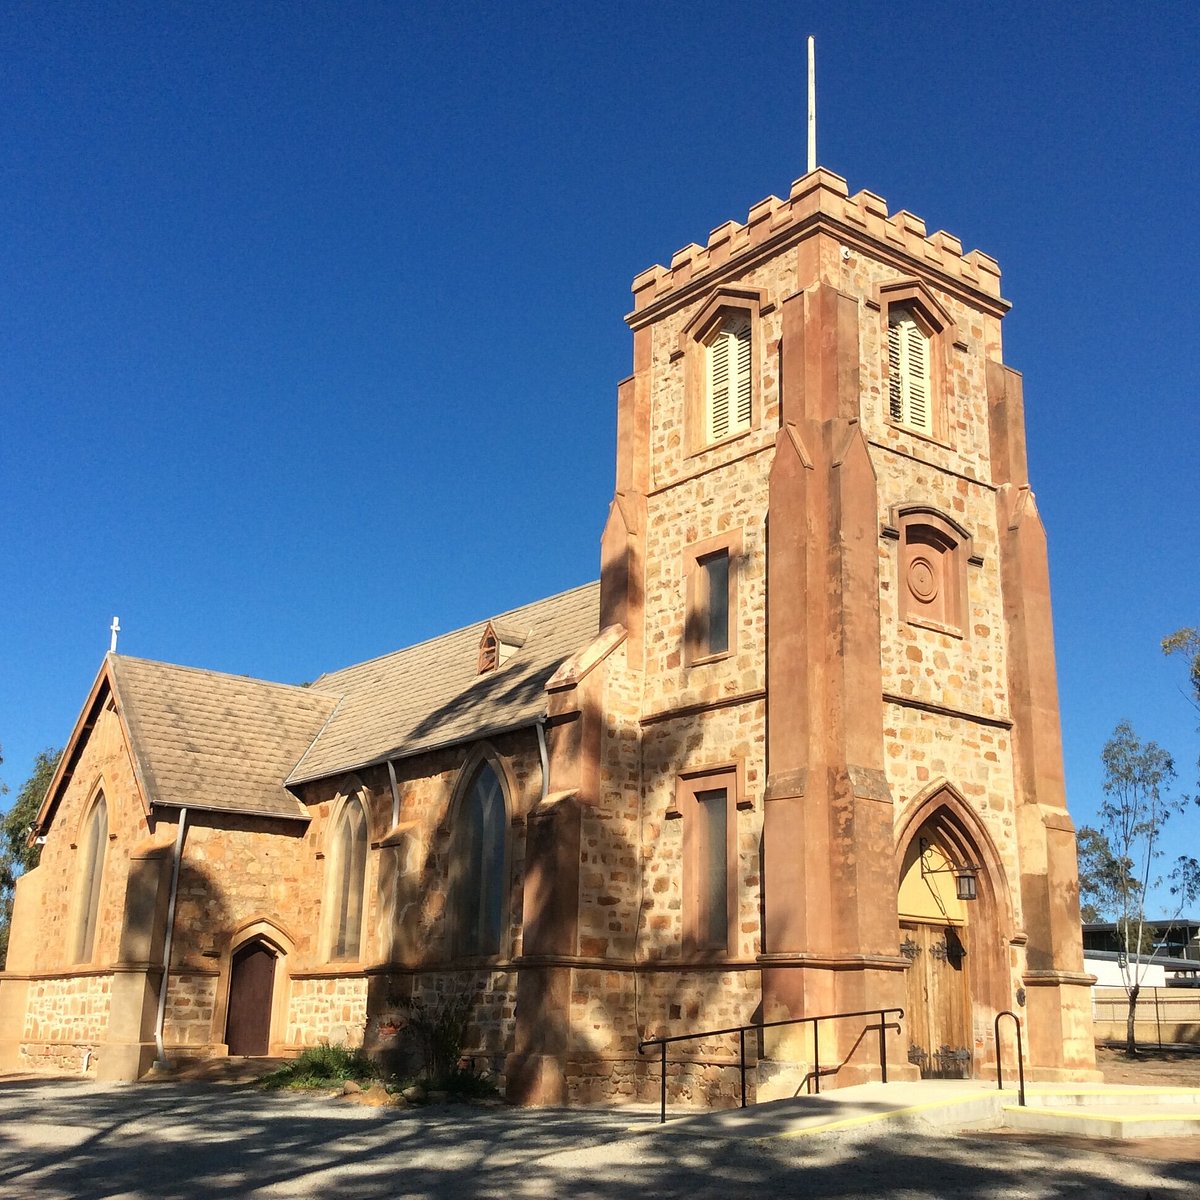 st-john-s-church-northam-all-you-need-to-know-before-you-go